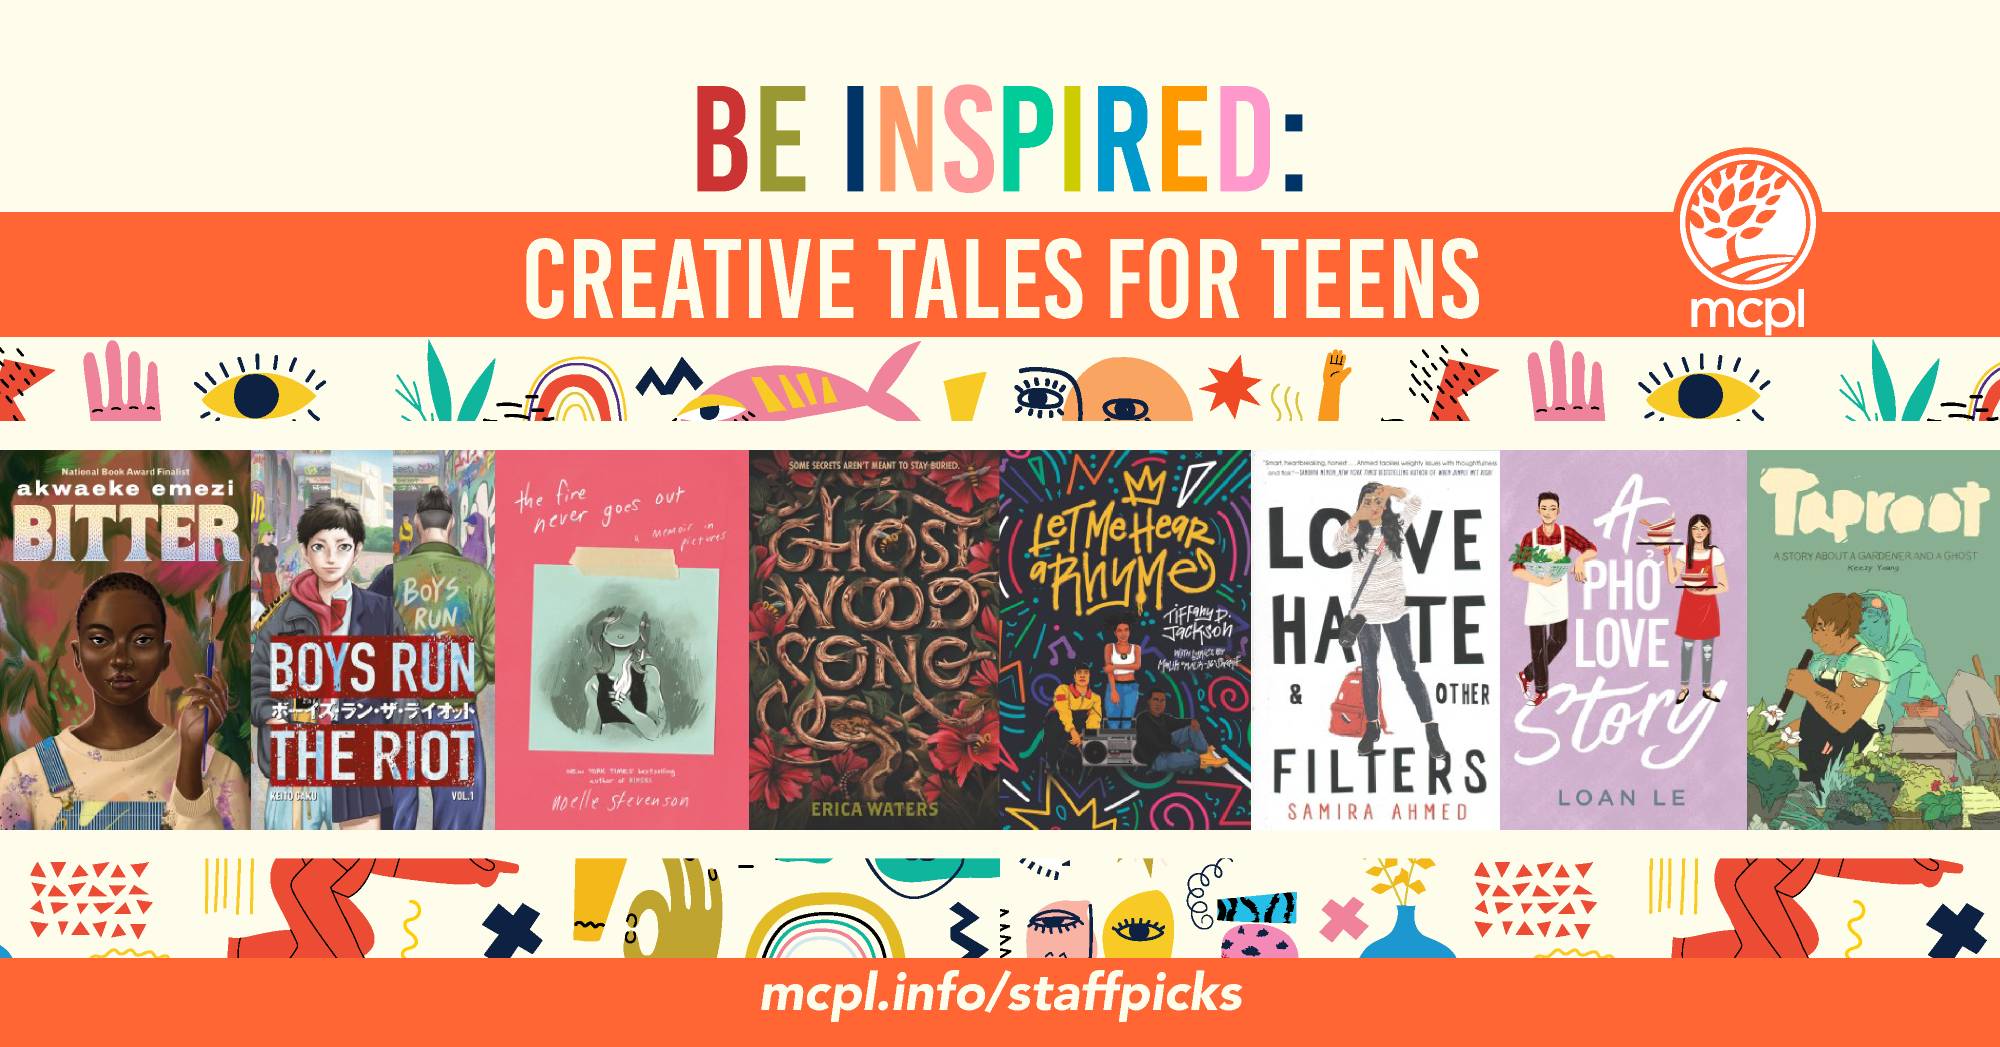 Be Inspired: Creative Tales for Teens